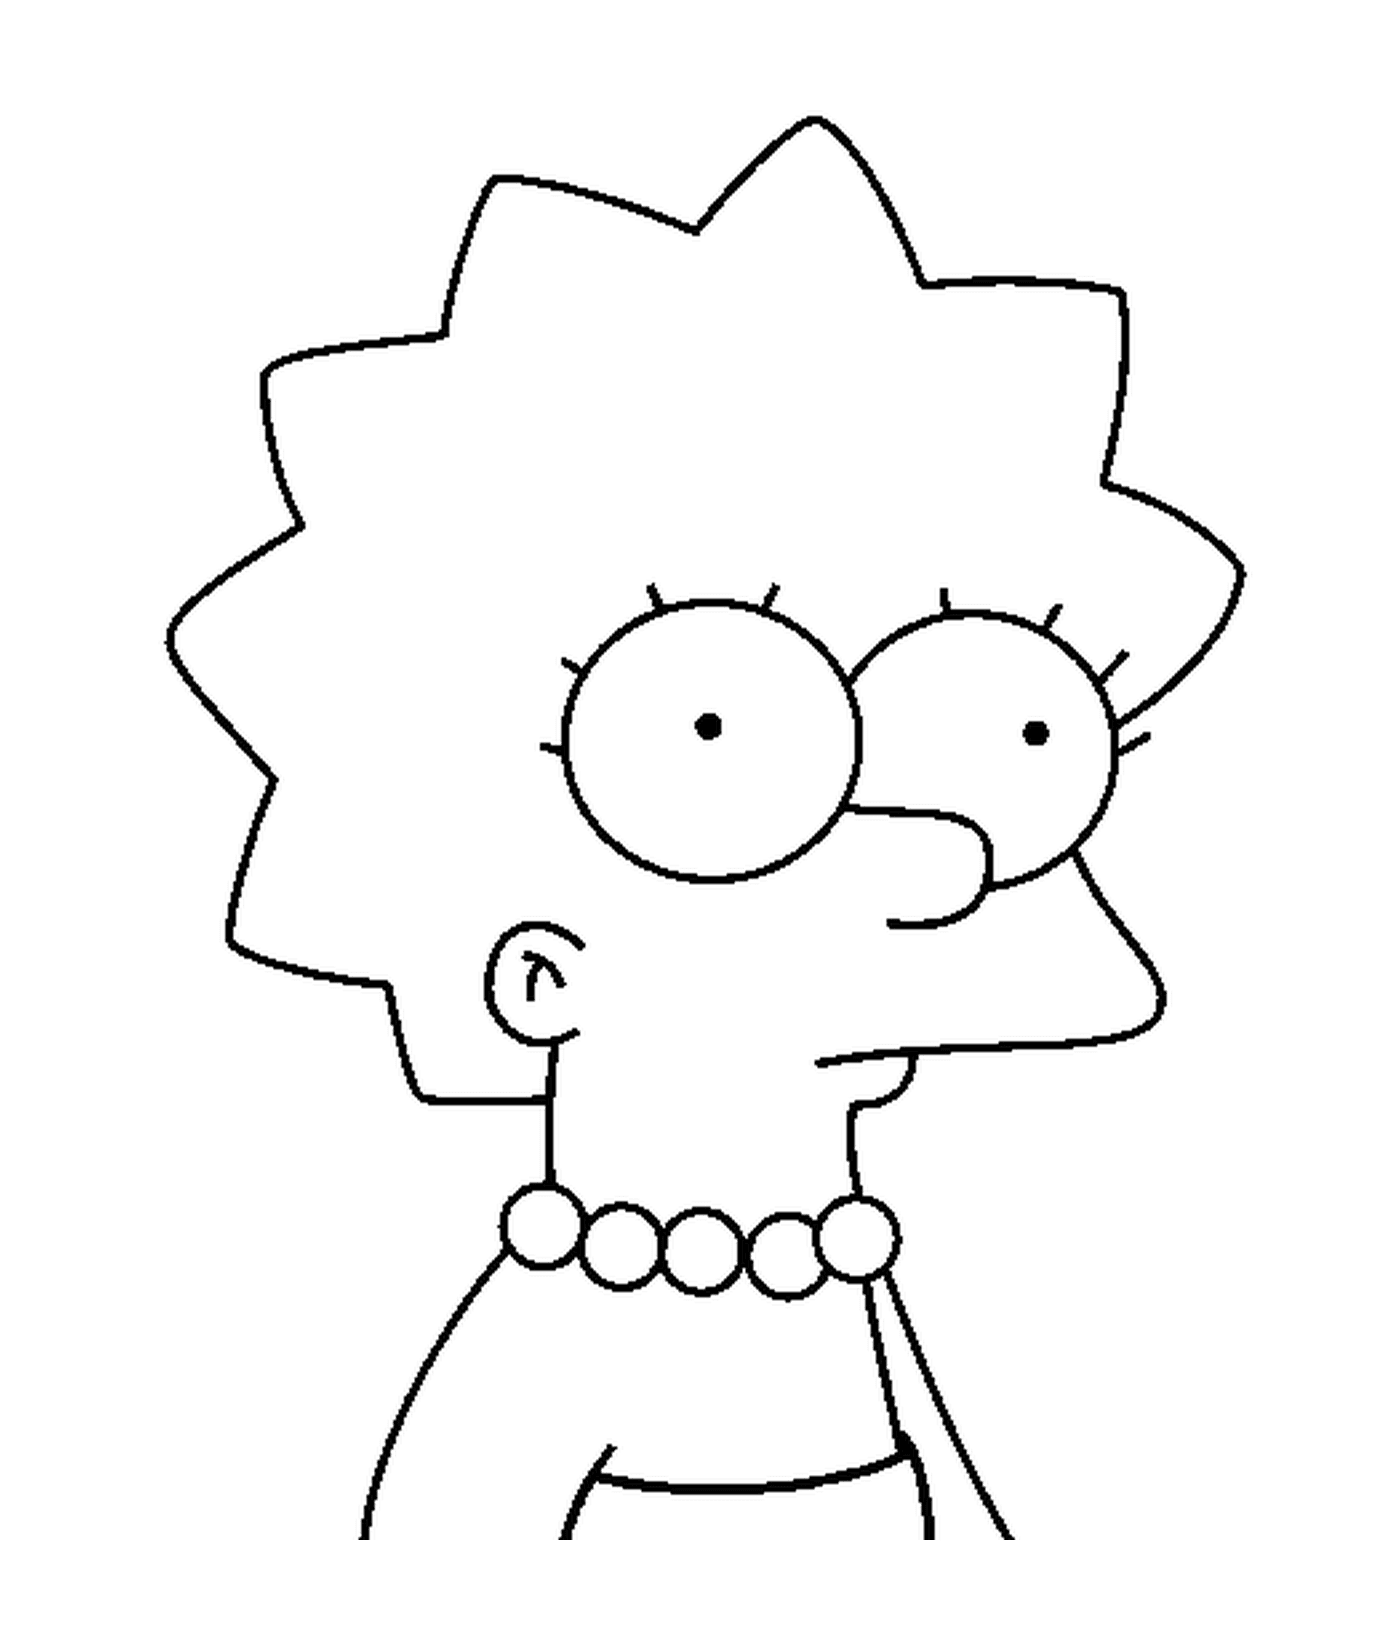  Lisa Simpson with pearls 